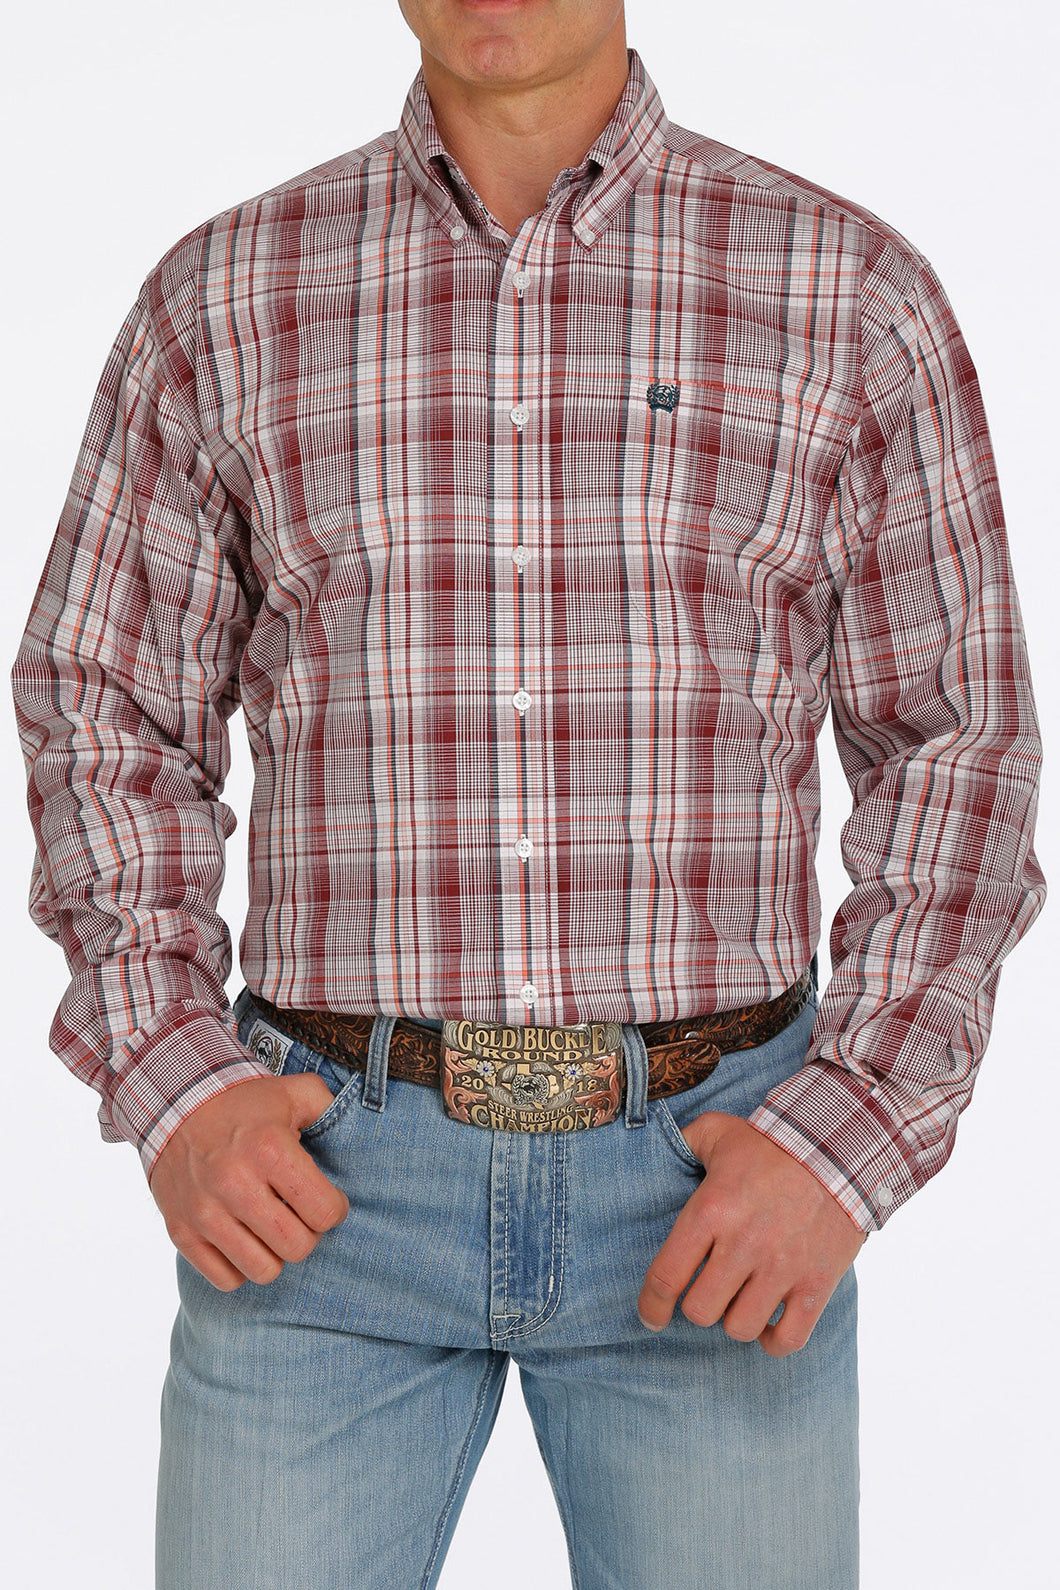 'Cinch' Men's Plaid Long Sleeve Button Down - White / Red